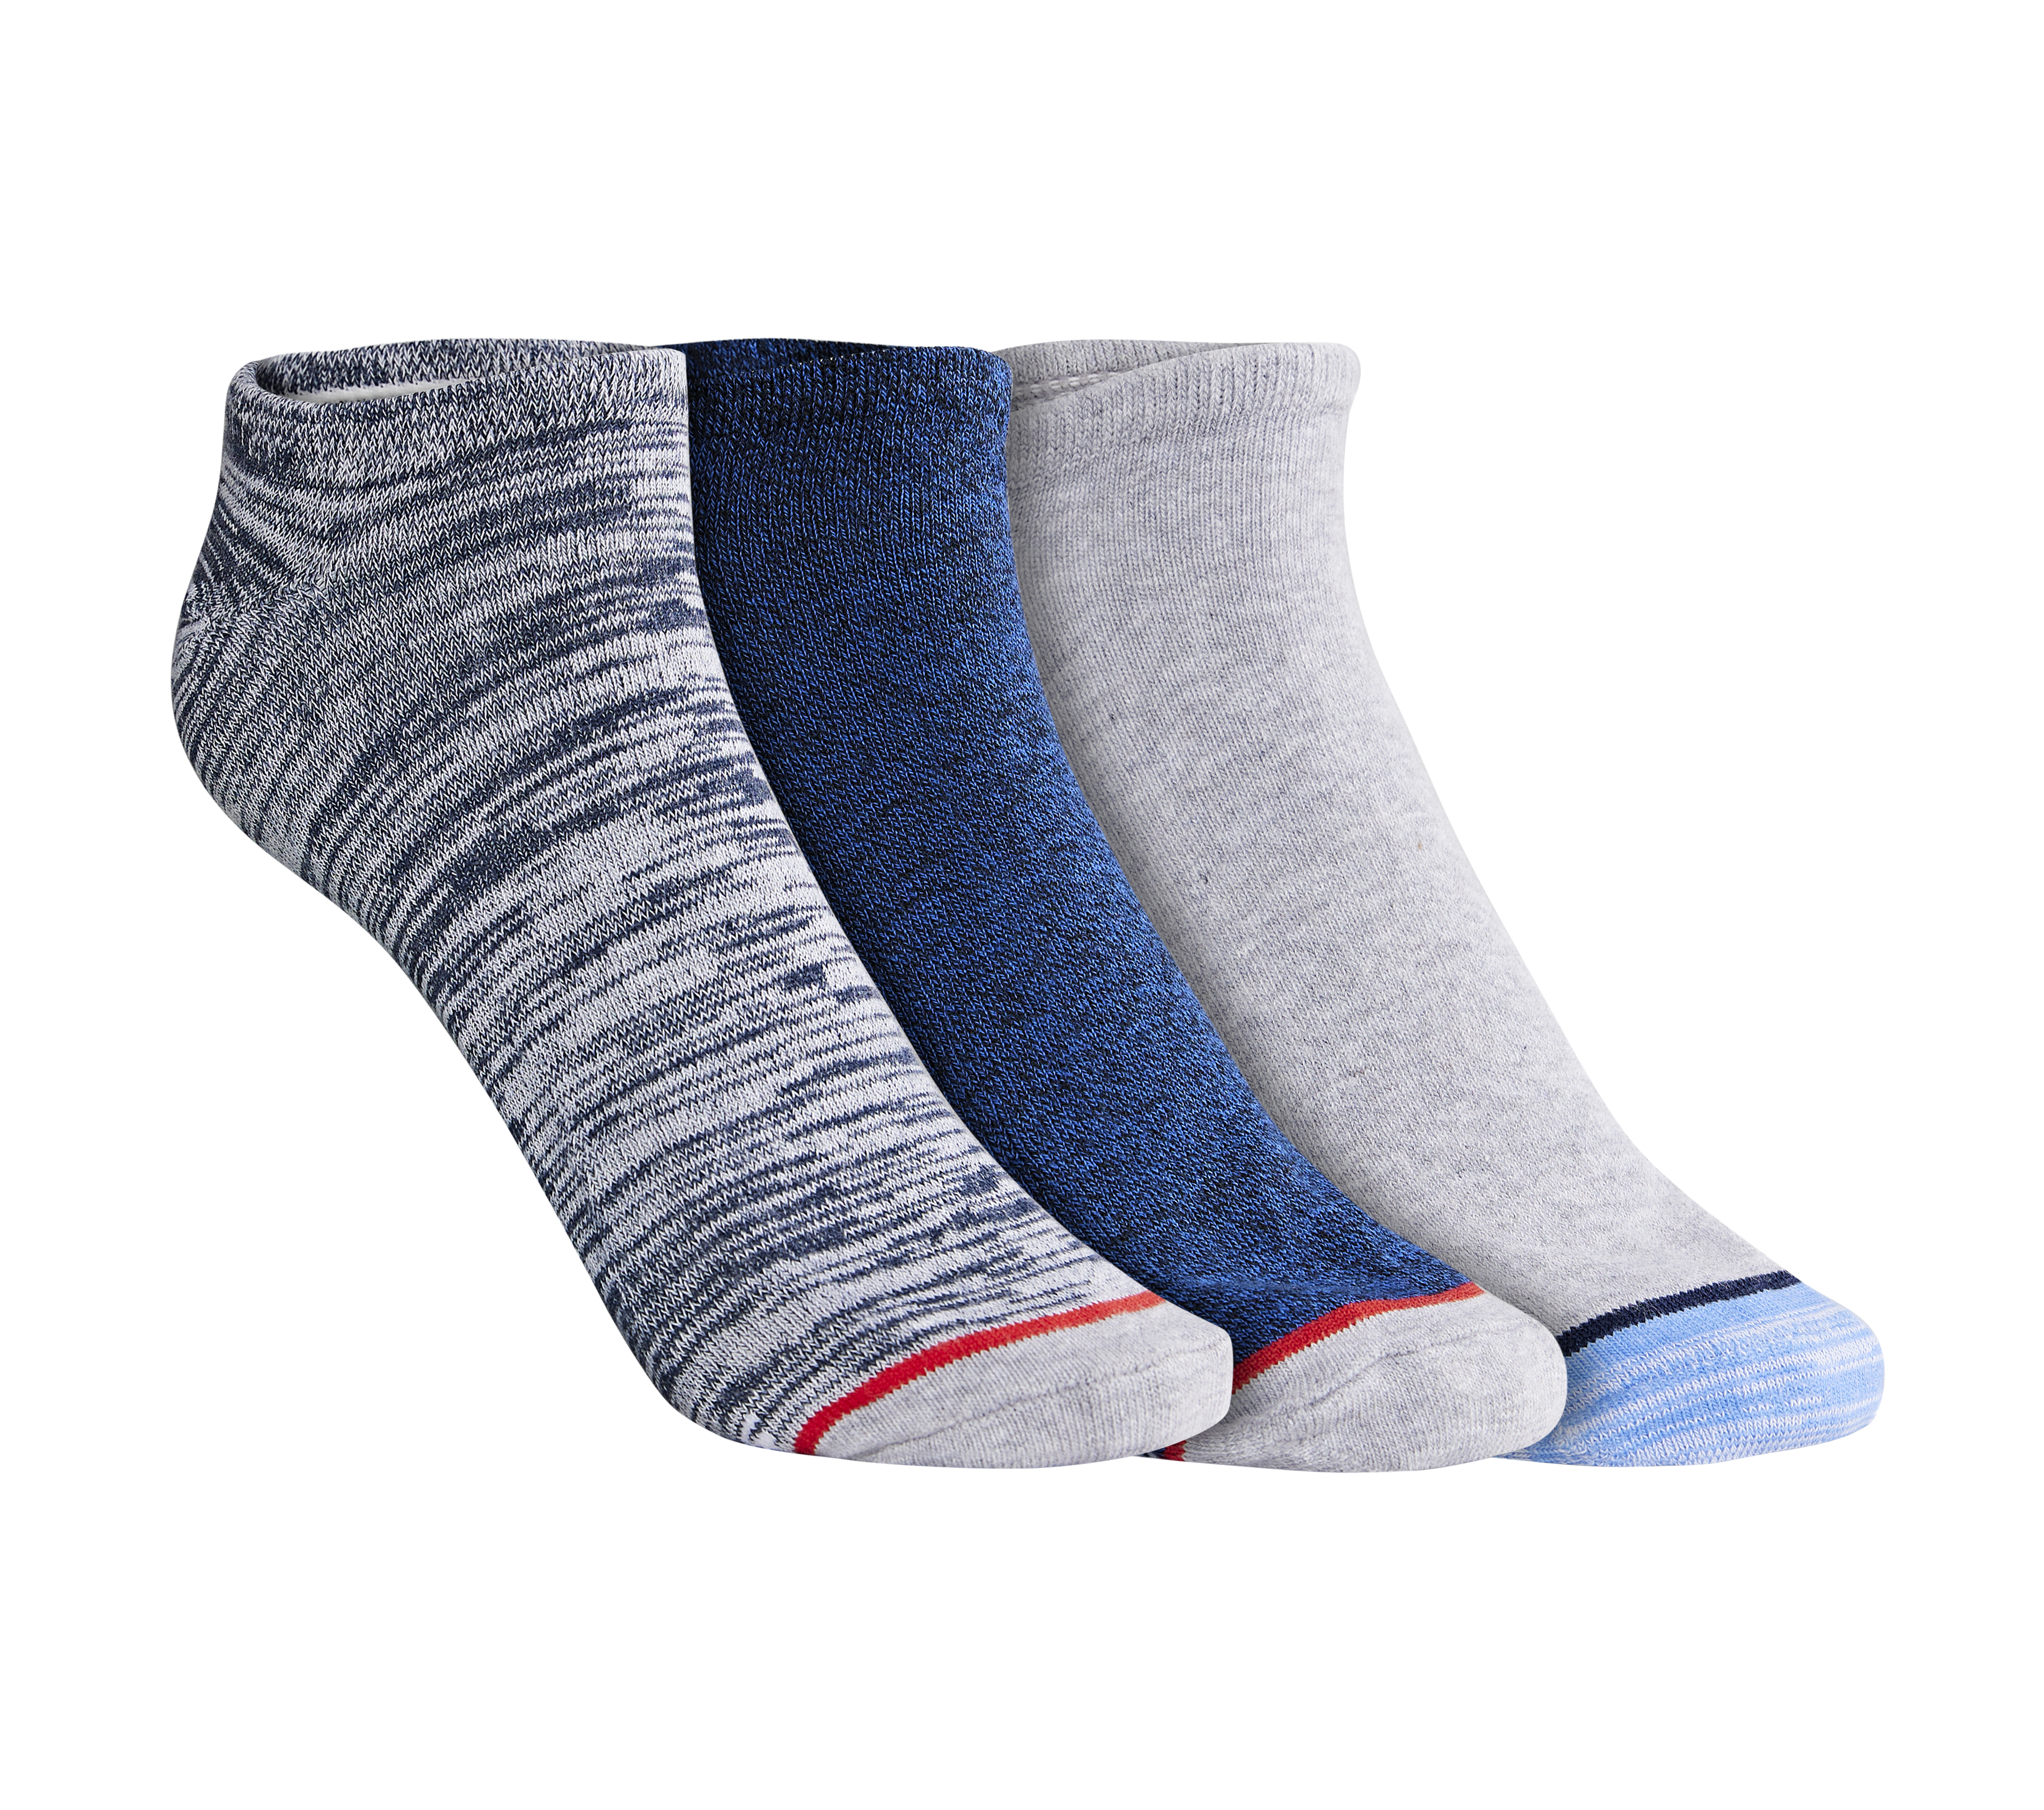 3PK MENS FLAT KNIT NO SHOW, BLUE/GREY Accessories Lateral View